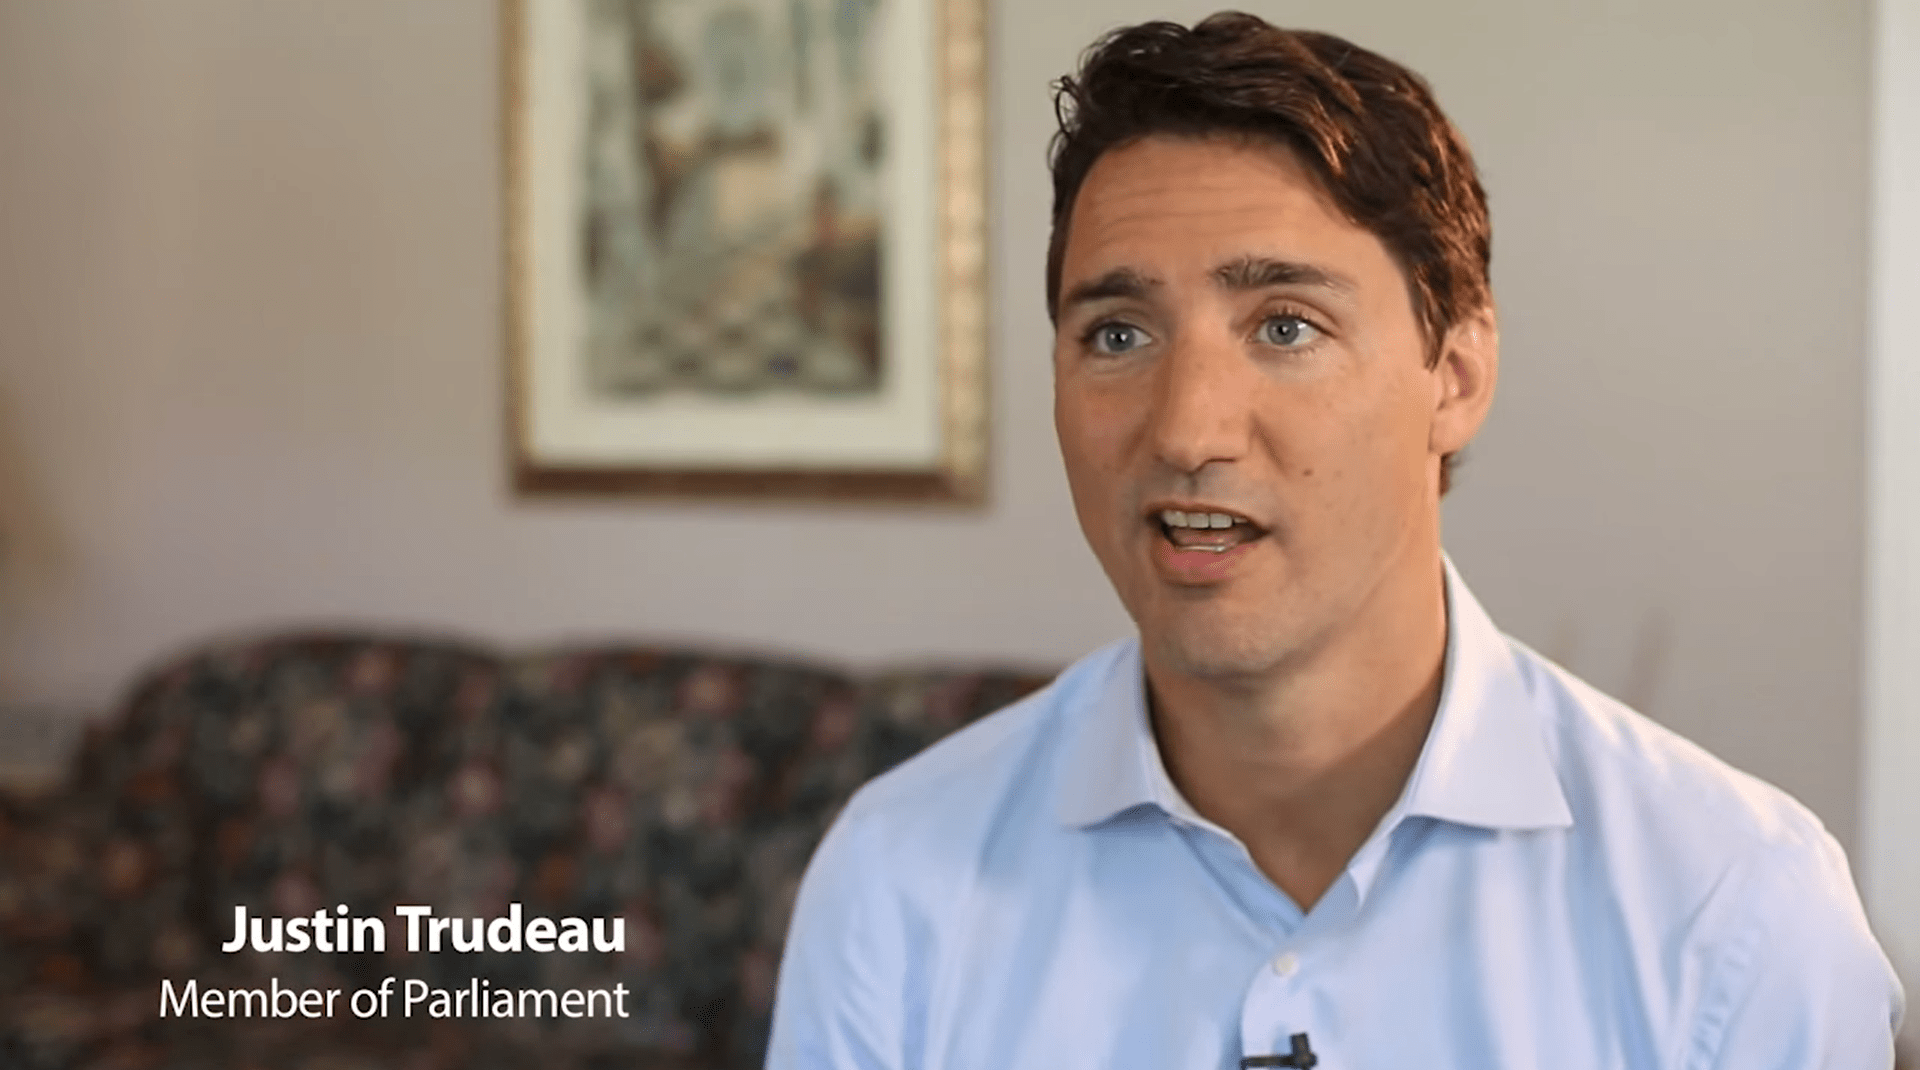 Member of Parliament, Justin Trudeau, spotlights PSWs for a day